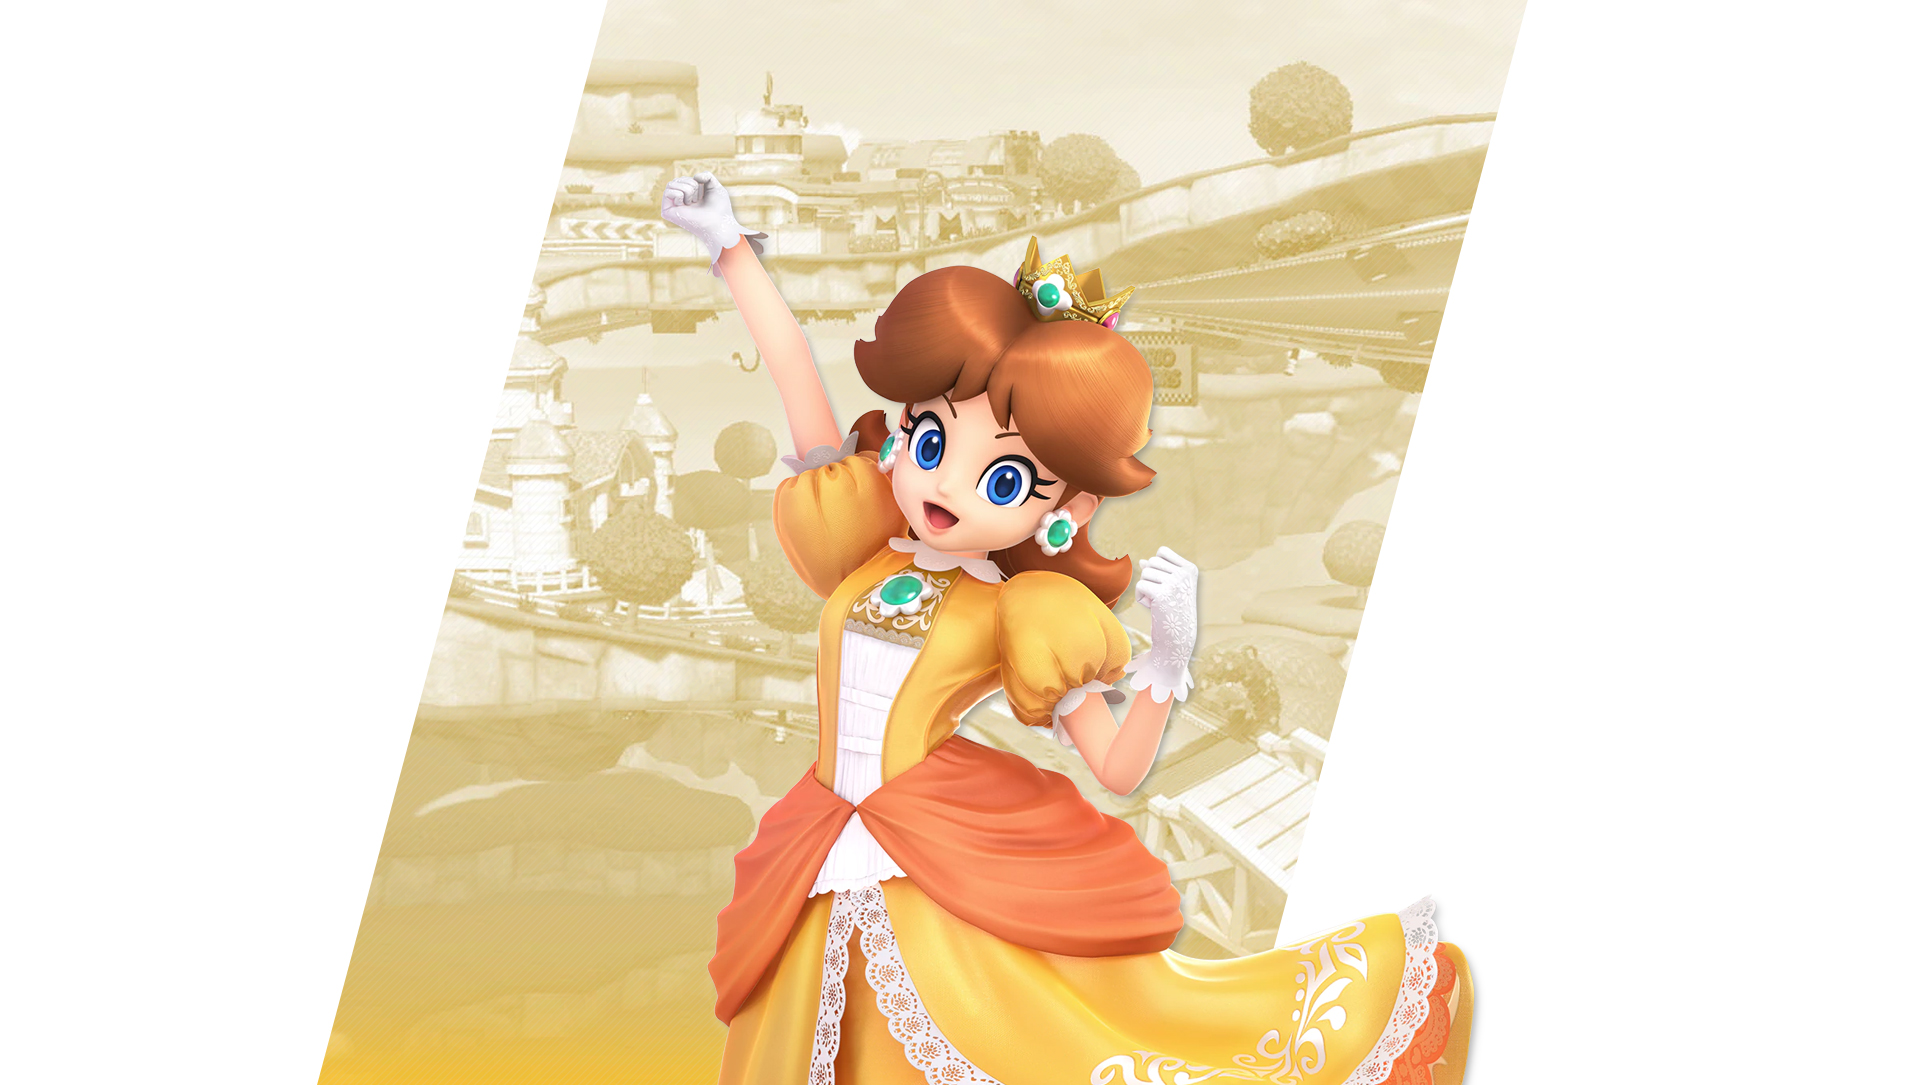 Super smash bros ultimate daisy wallpapers